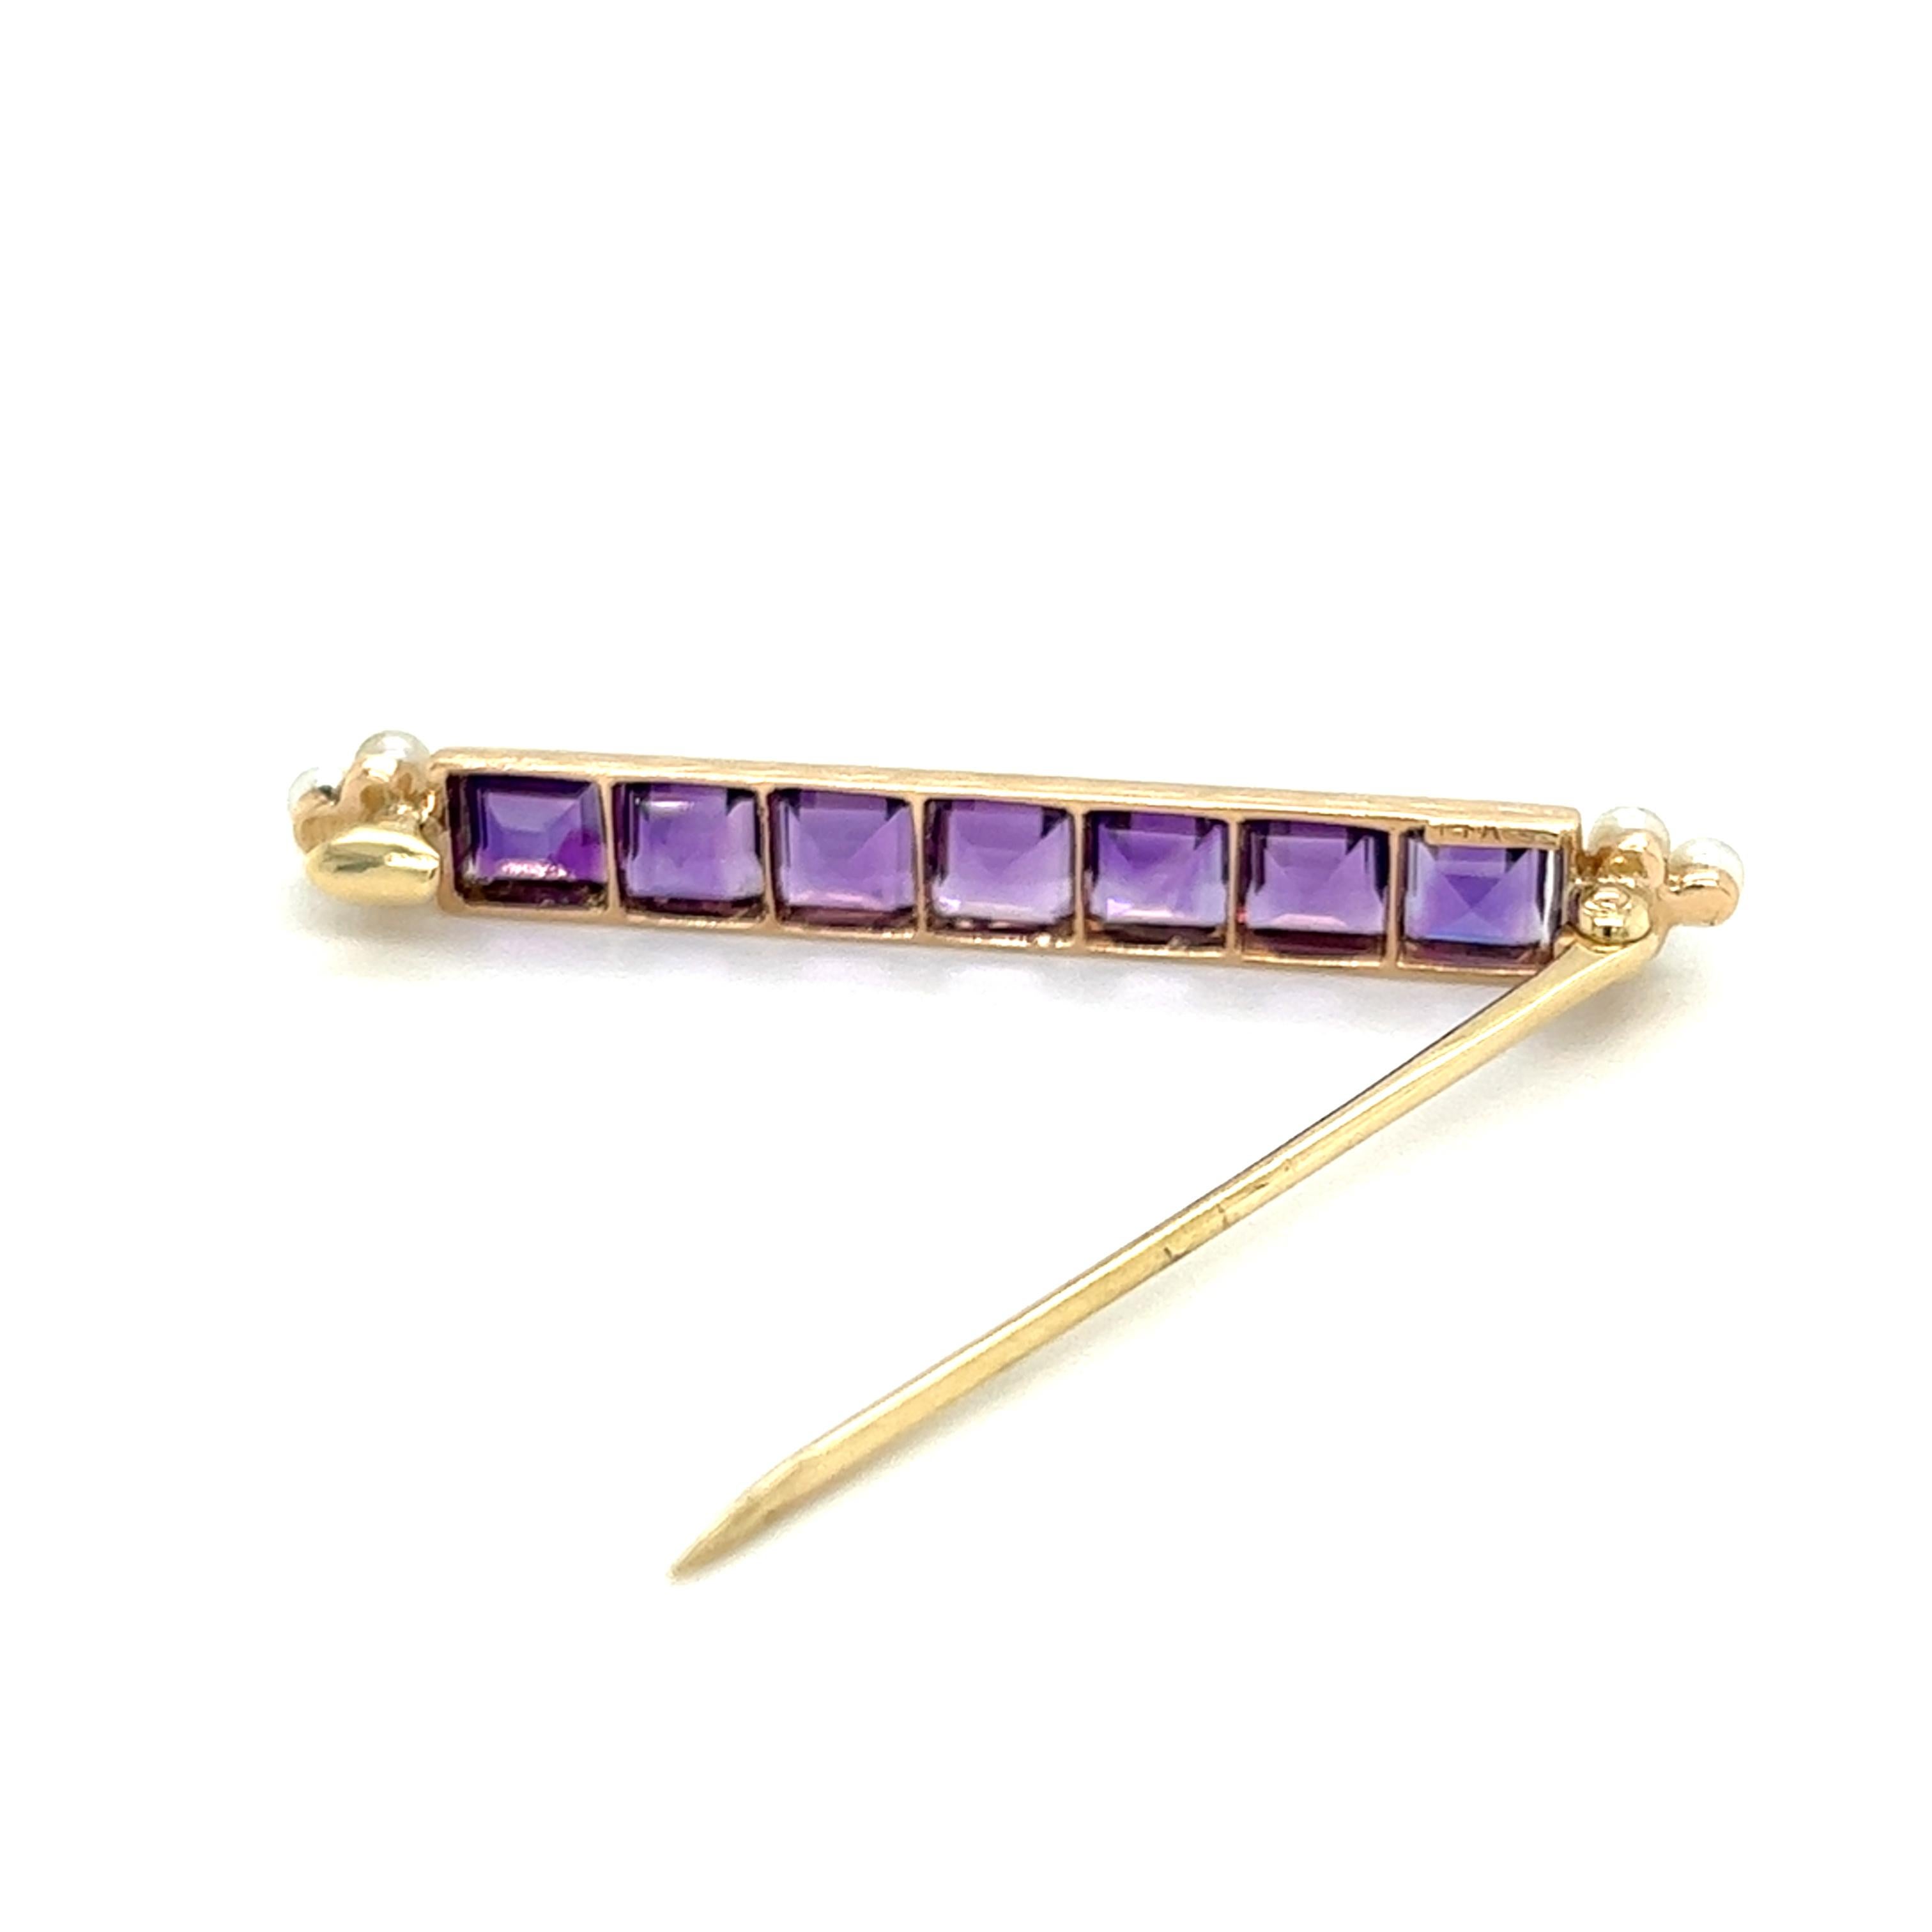 One 14 karat yellow gold Edwardian bar pin set with seven (7) 5mm square cut amethysts and six (6) 2.7mm cultured pearls.  The pin measures two inches long and is complete with a traditional pin closure. The pin is stamped 14K and weighs 2.5 grams